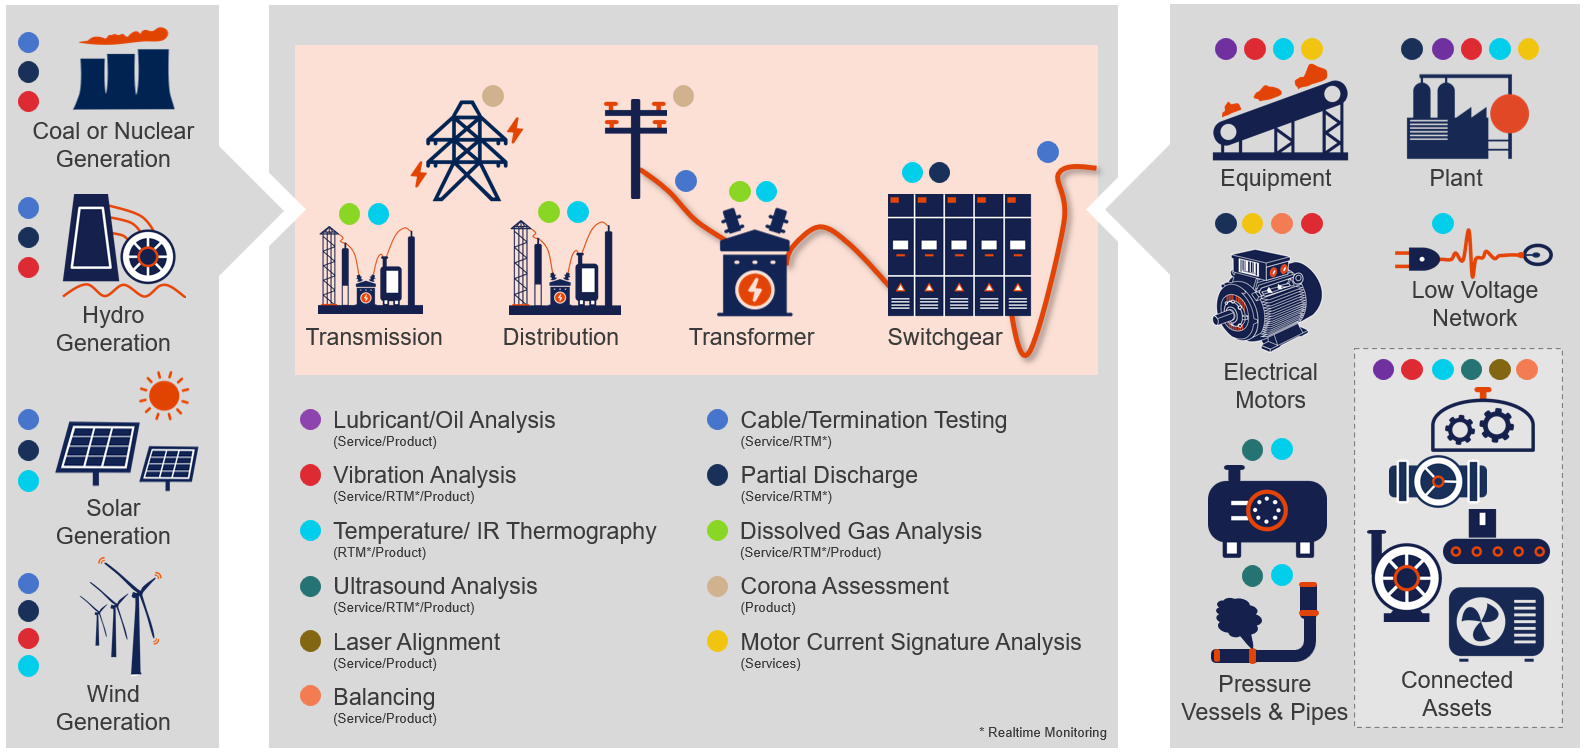 Overview of typical condition monitoring technologies per asset type